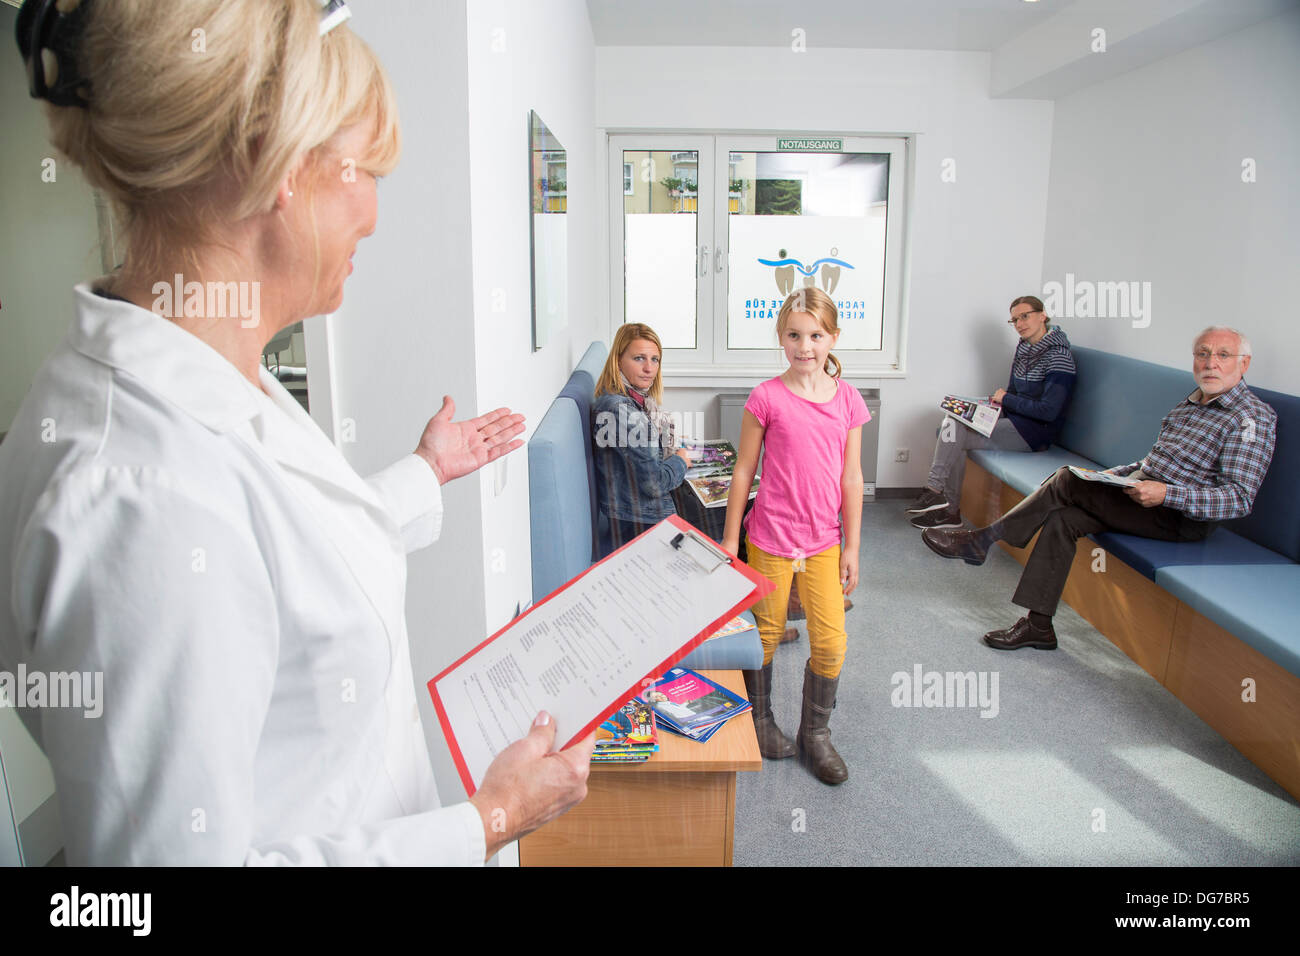 Dental practice, patients in the waiting room. Stock Photo